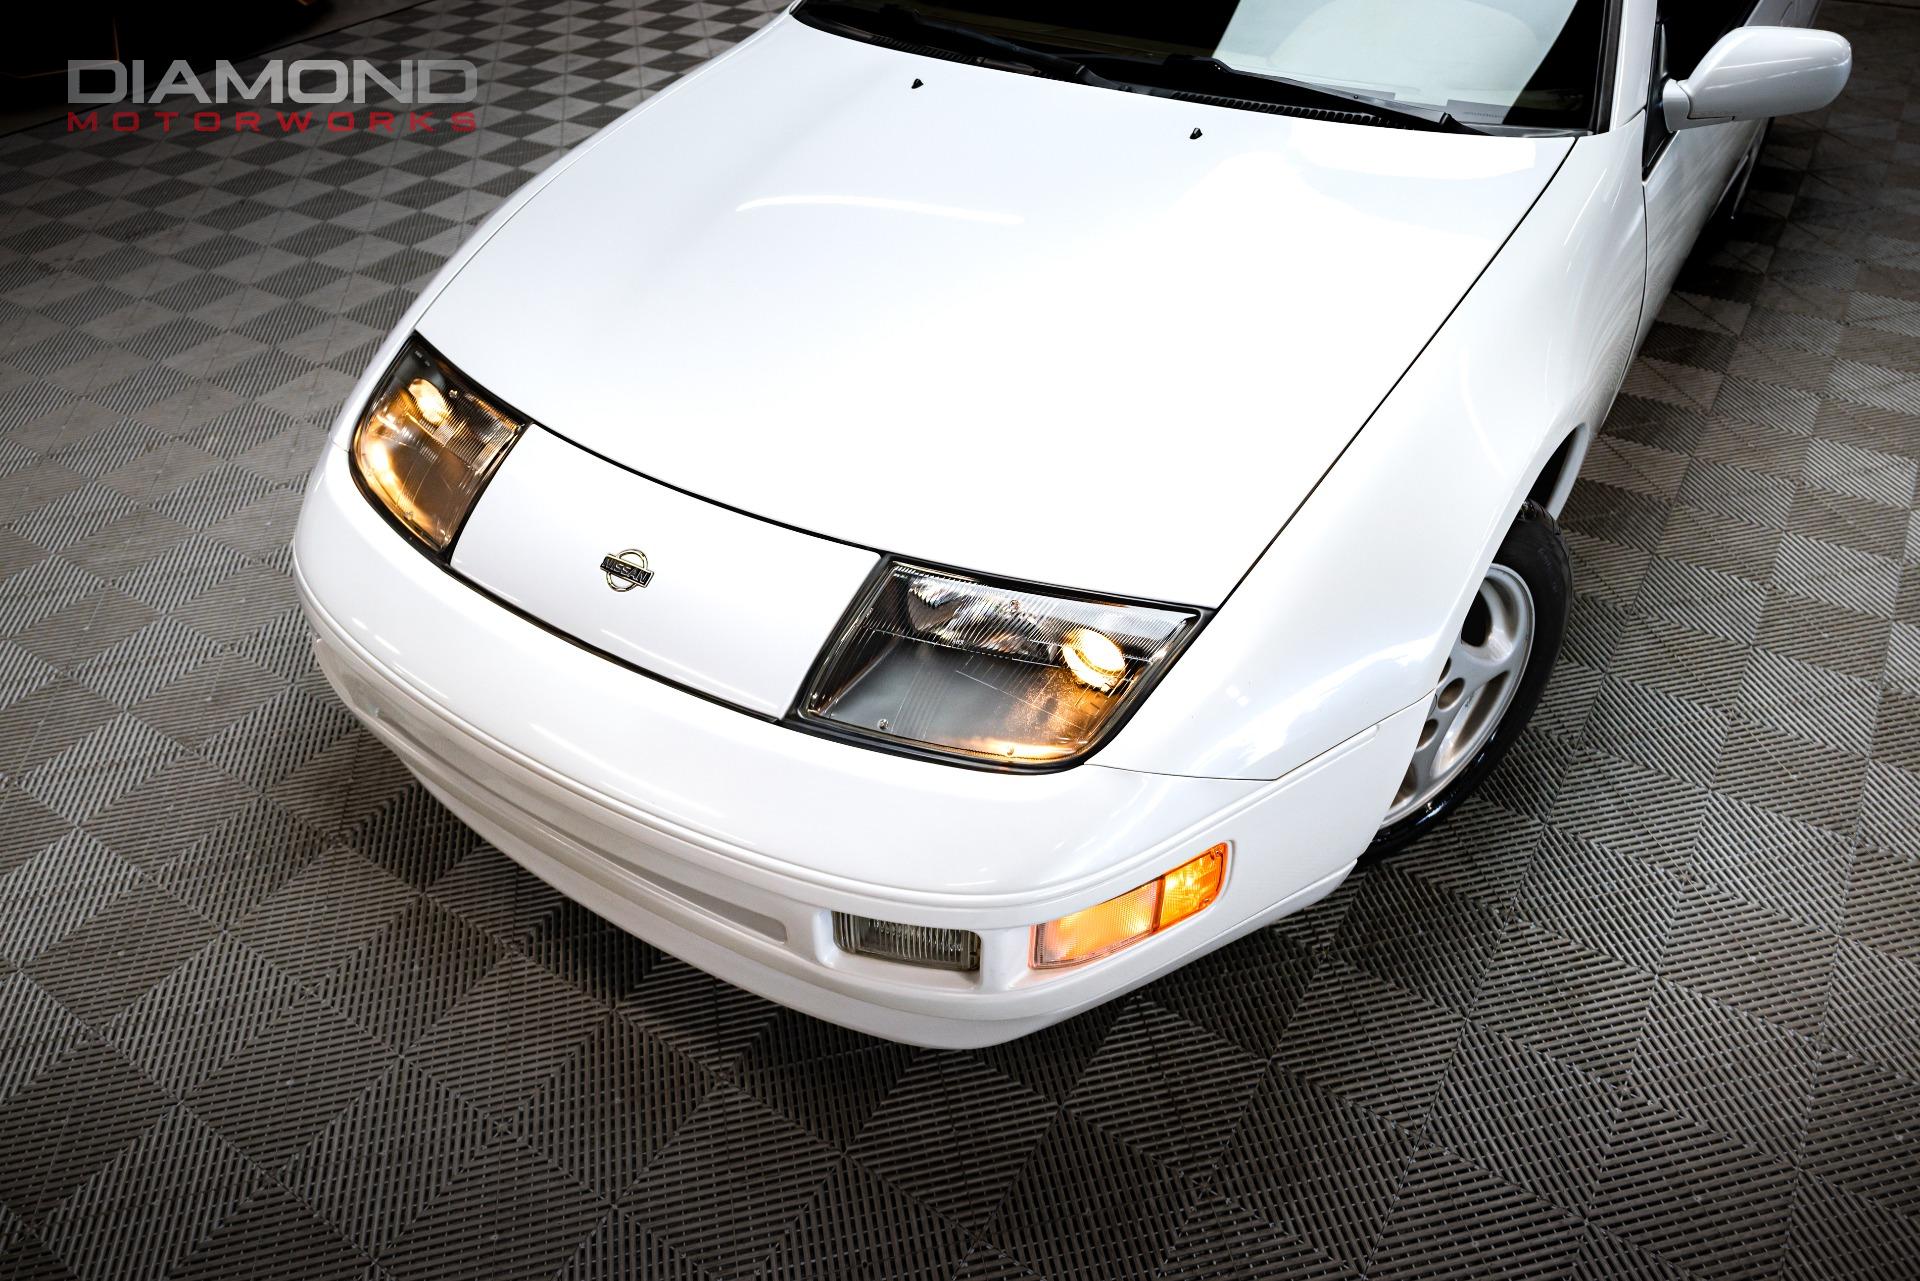 Used 1995 Nissan 300ZX For Sale (Sold) | Diamond Motorworks Stock 